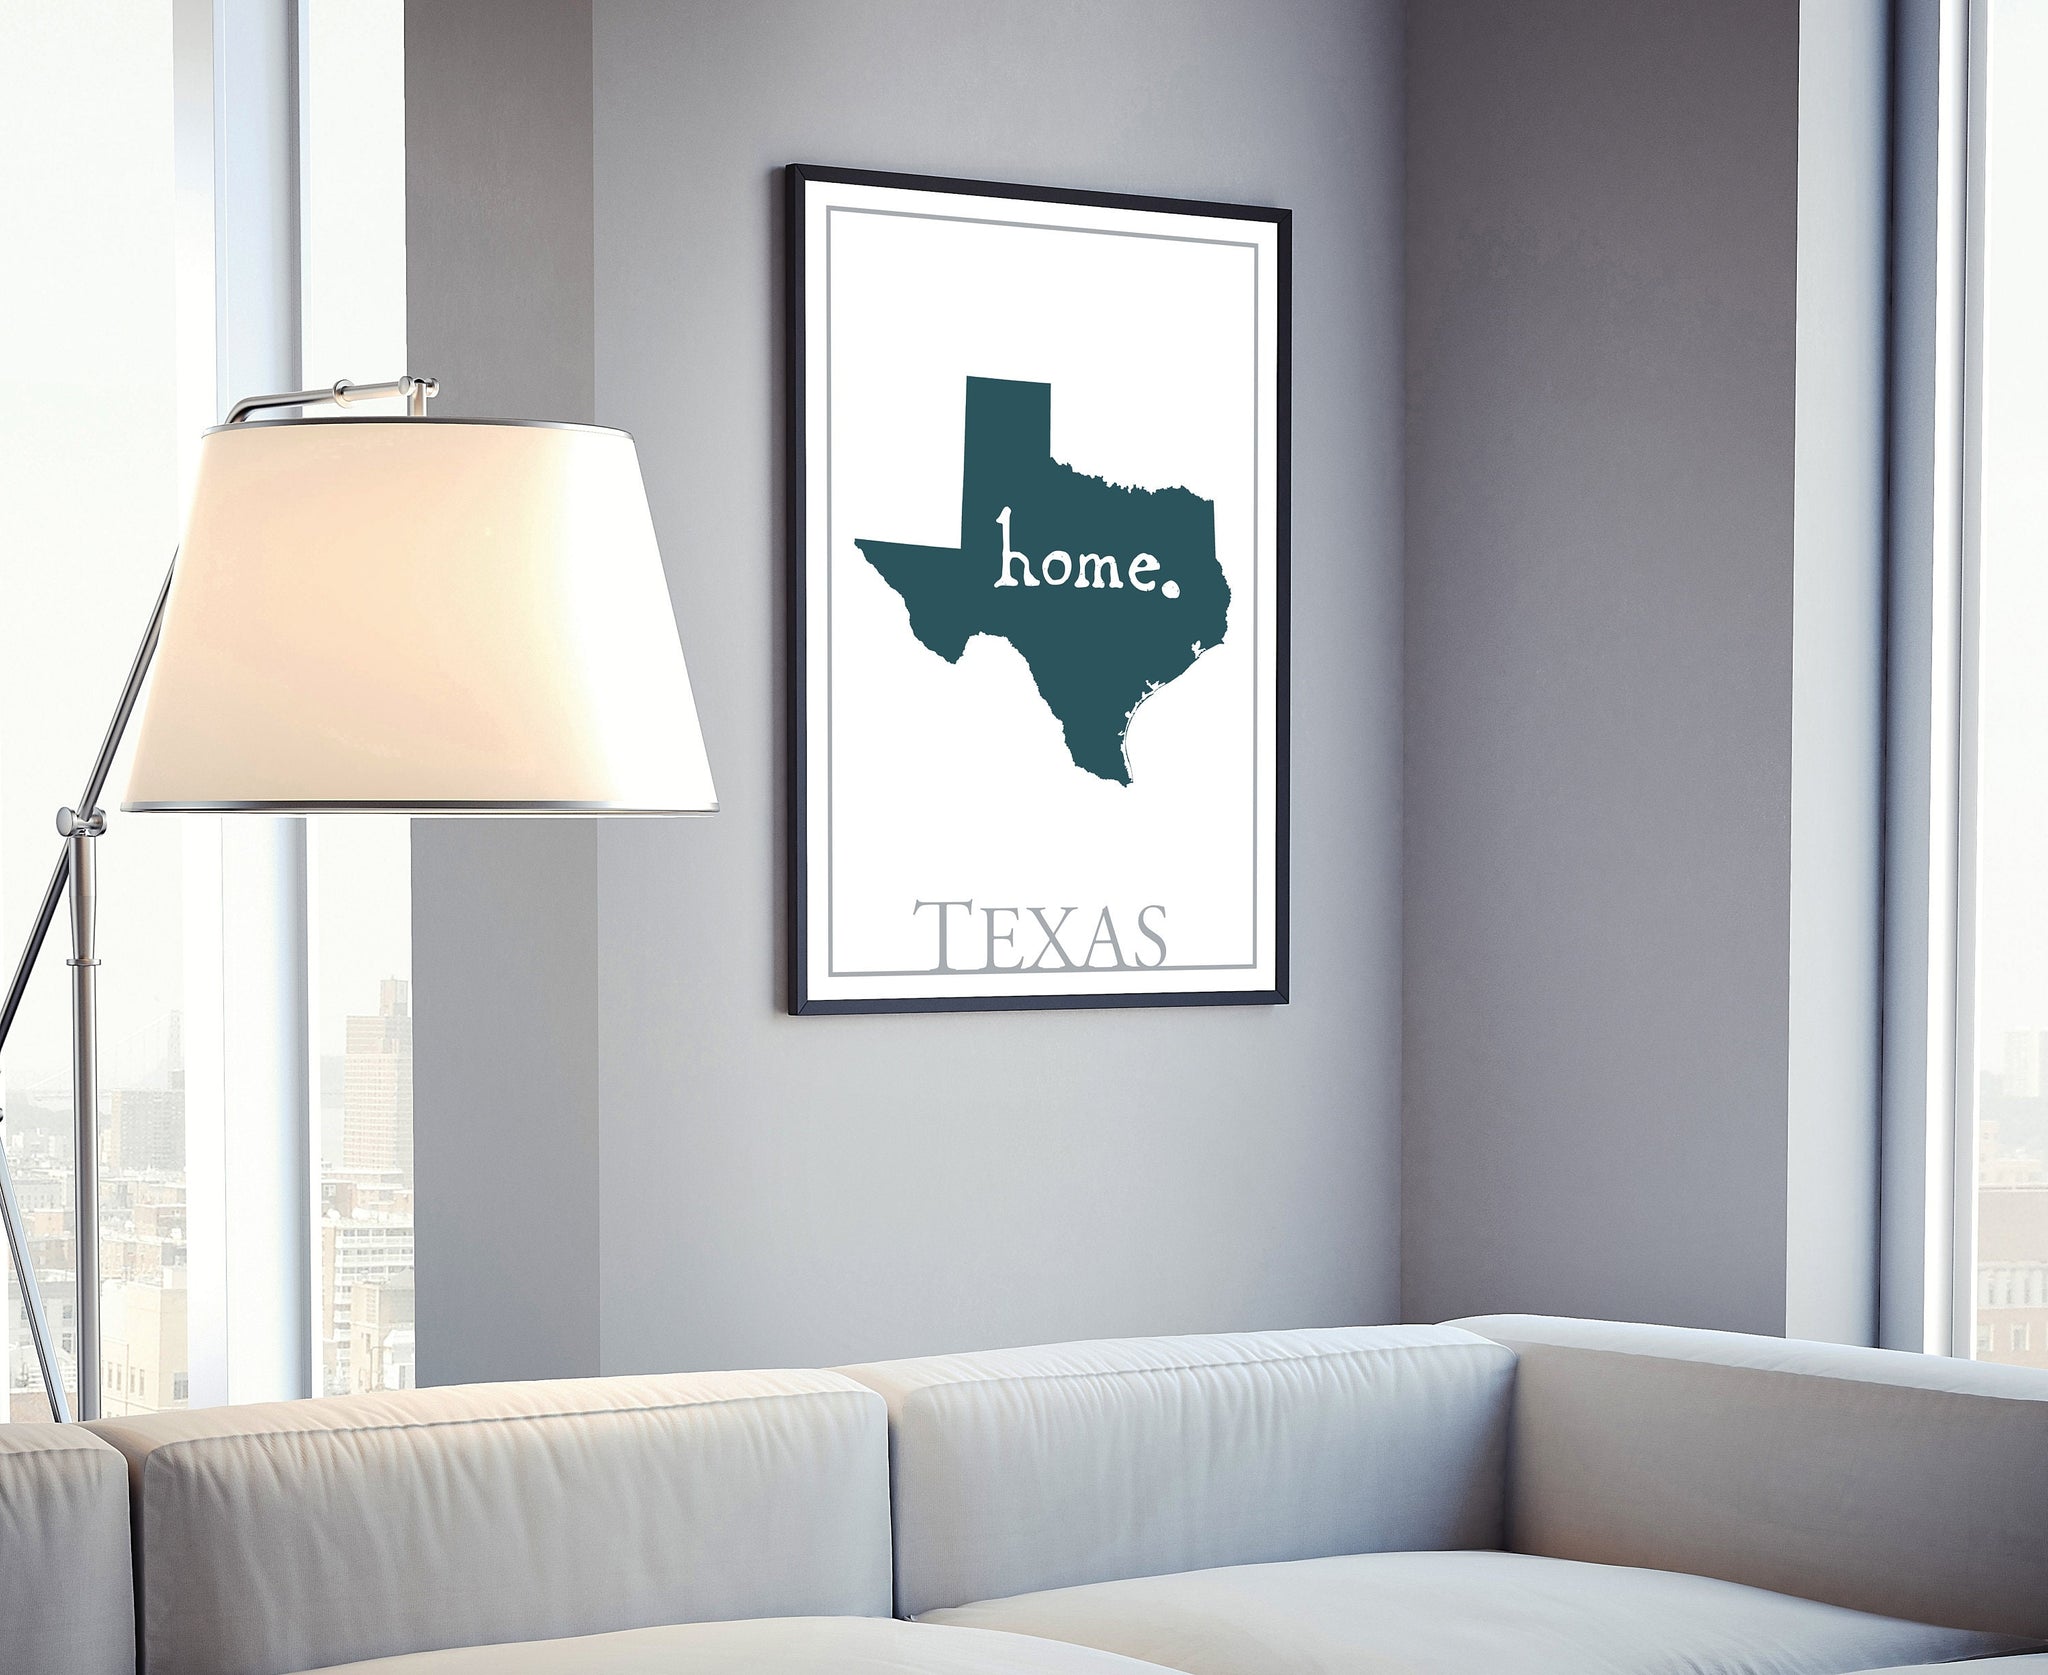 Texas Map Wall Art, Texas Modern Map Poster Print, City map wall decor, Texas City Poster Print, Texas State Poster, Home wall decor, Gifts